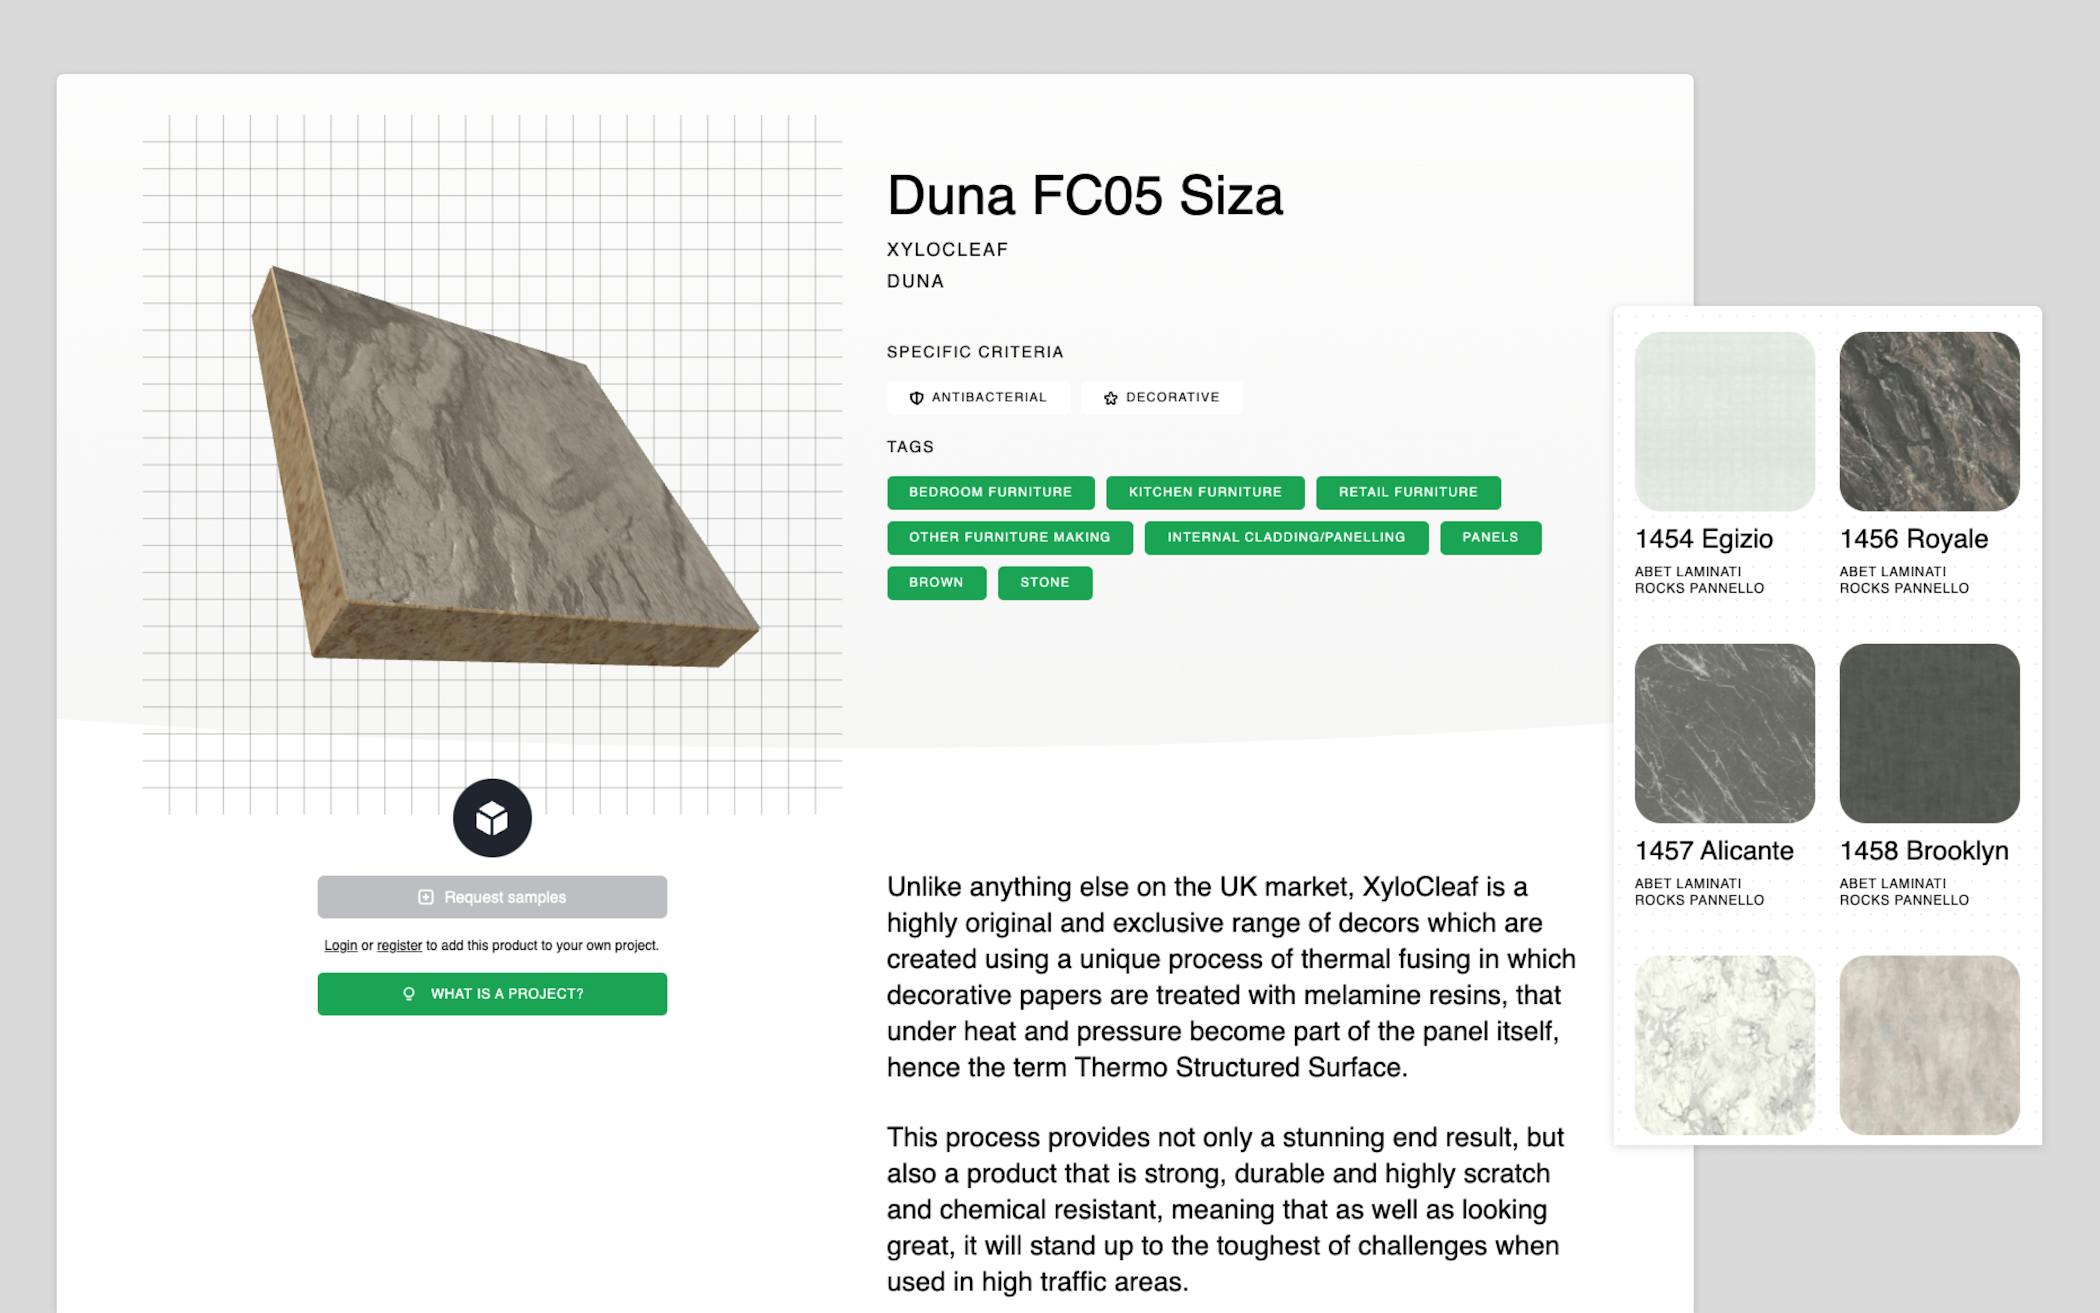 Image of a product page, showing the interactive material sample and alternative materials to the side.